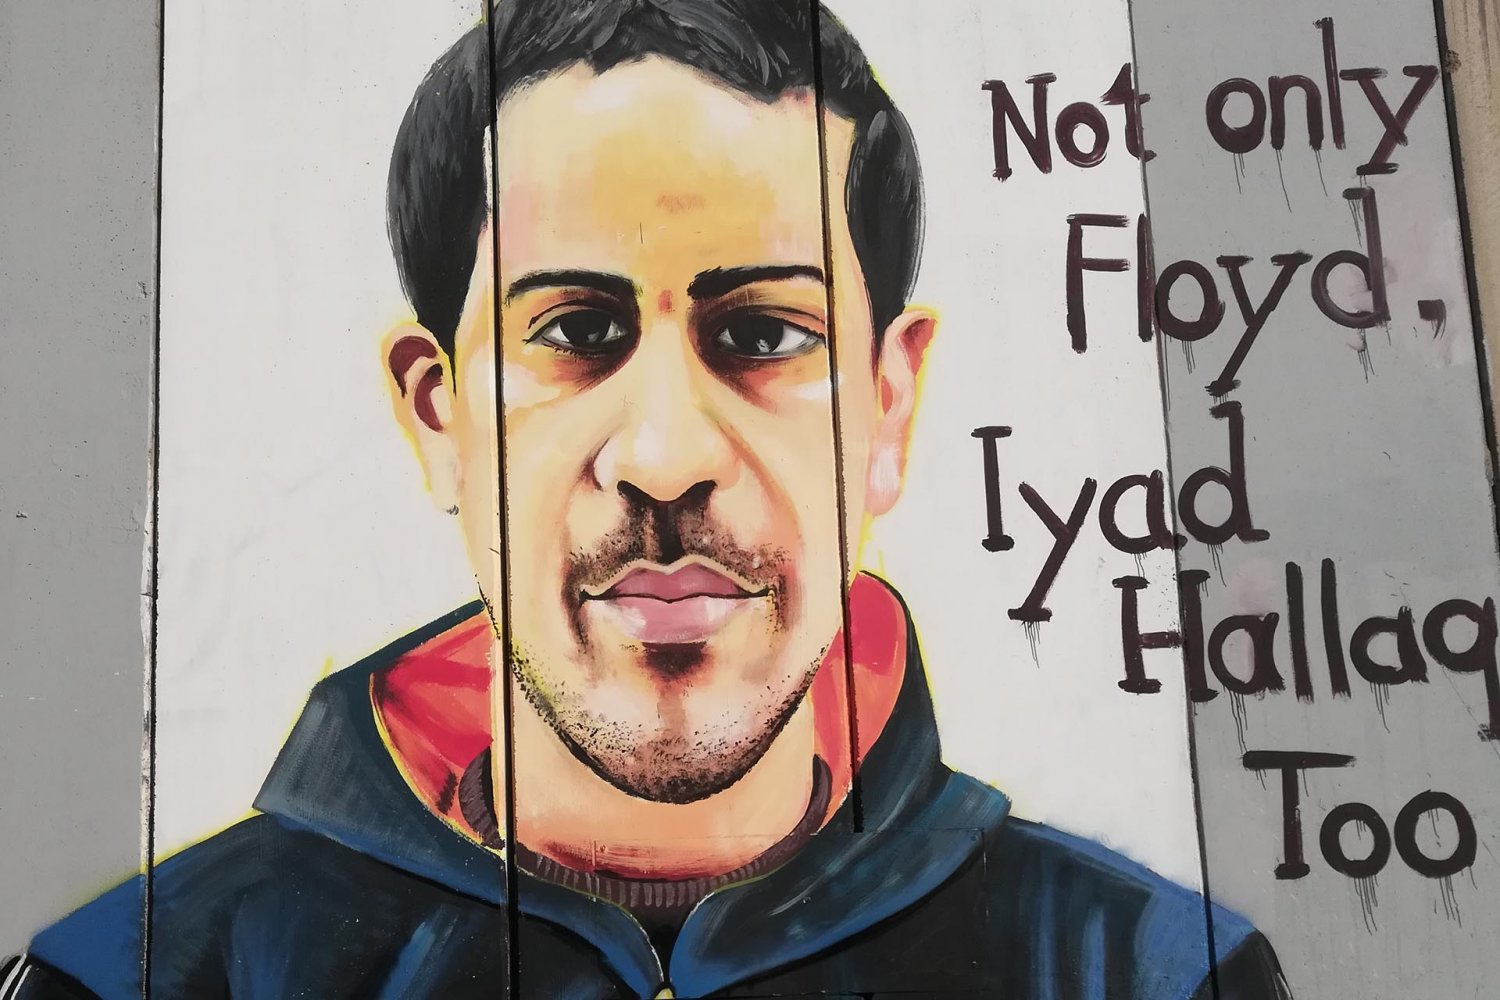 Separation Wall mural near Bethlehem compares slain Palestinian Eyad Hallaq to George Floyd, an unarmed Black man killed in the US by a white policeman.